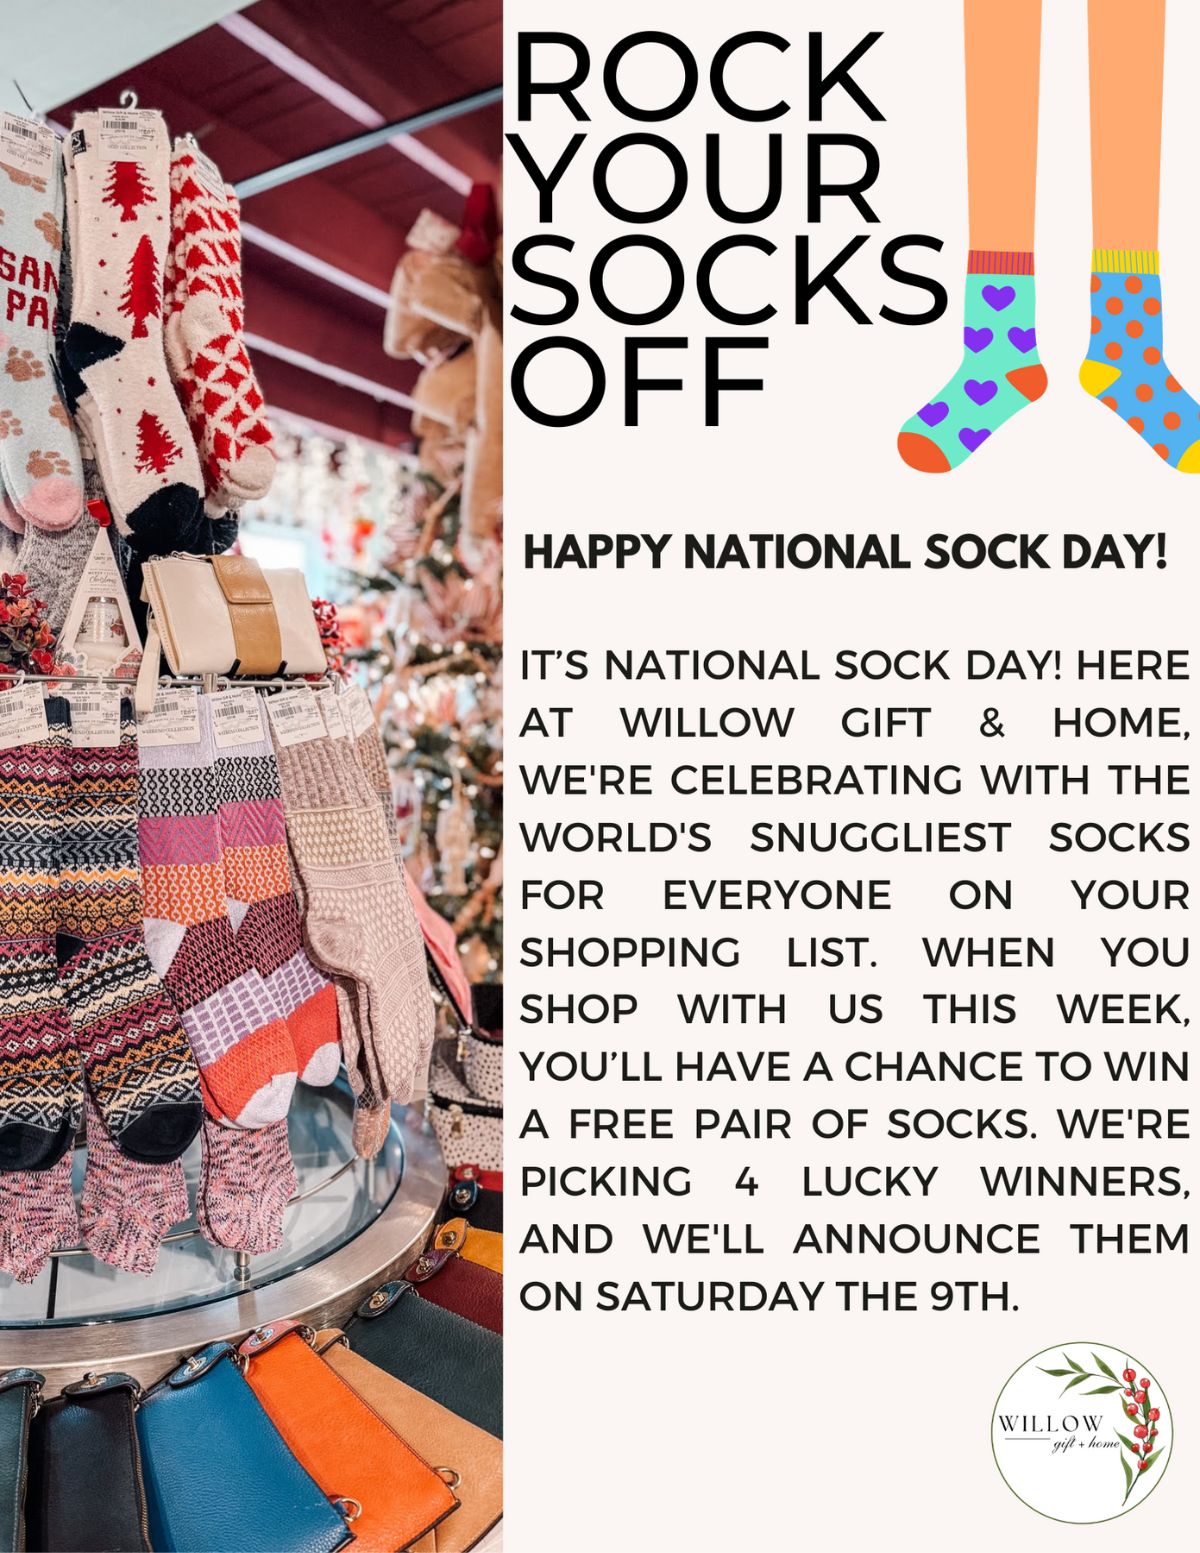 Rock Your Socks Off on National Sock Day